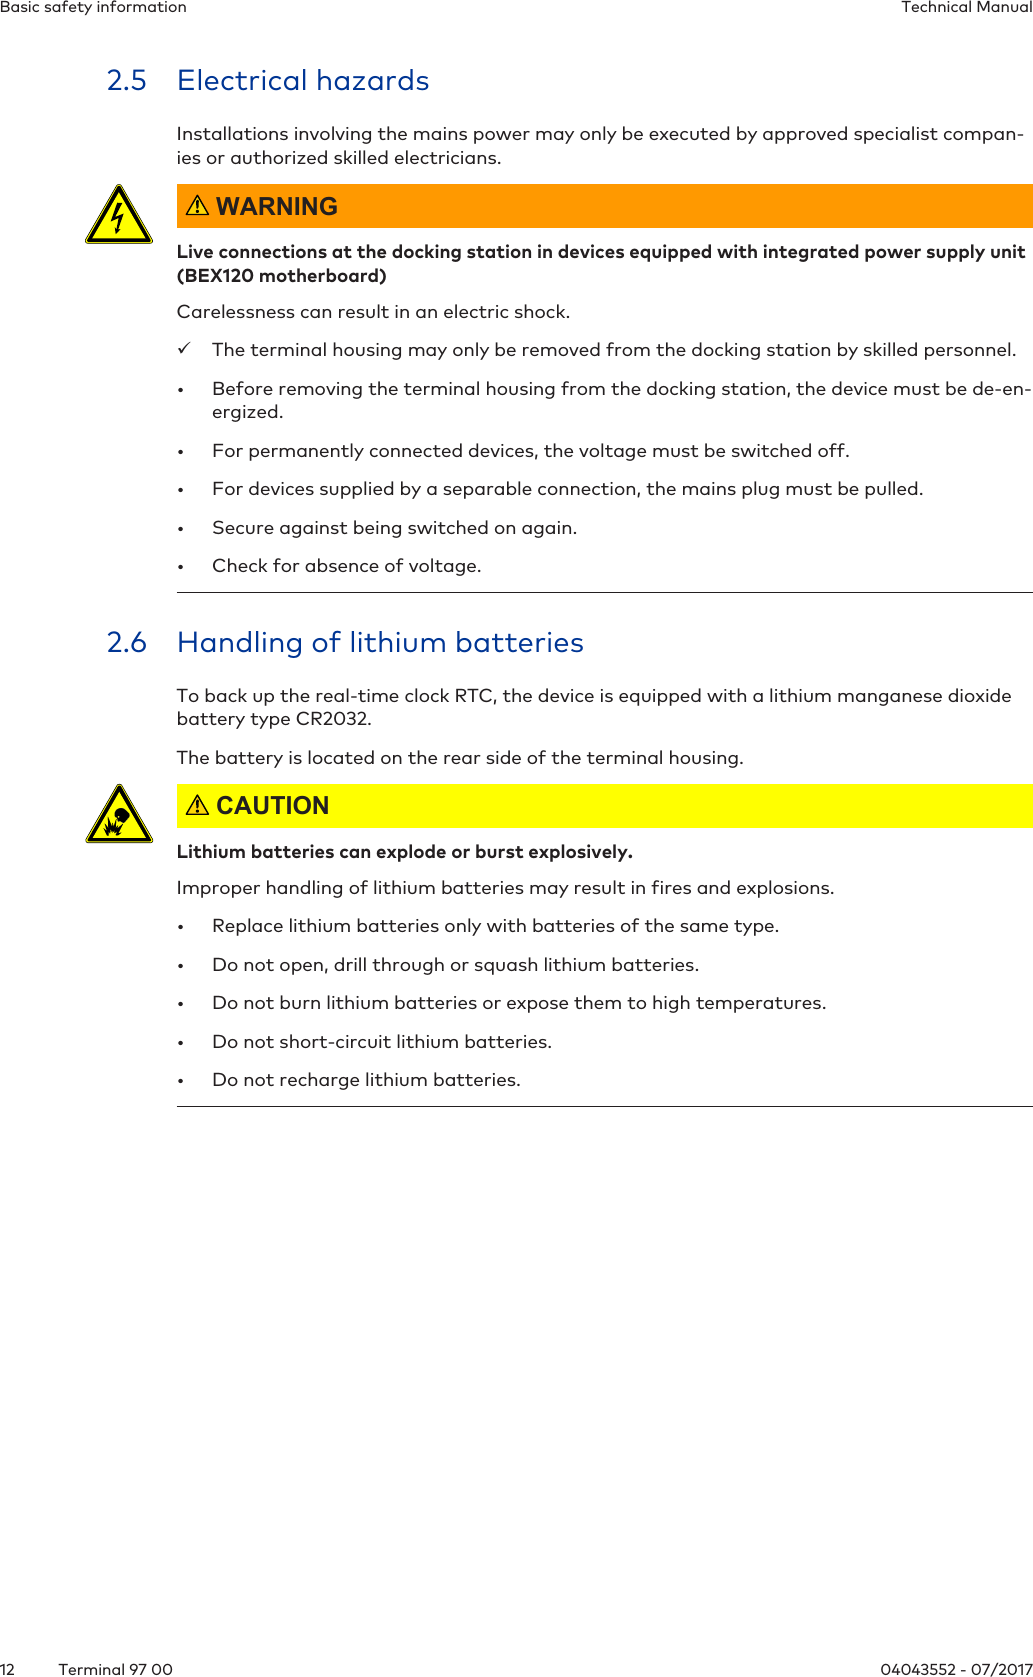 Basic safety information Technical Manual12 04043552 - 07/2017Terminal 97 002.5 Electrical hazardsInstallations involving the mains power may only be executed by approved specialist compan-ies or authorized skilled electricians. WARNINGLive connections at the docking station in devices equipped with integrated power supply unit(BEX120 motherboard)Carelessness can result in an electric shock.üThe terminal housing may only be removed from the docking station by skilled personnel.• Before removing the terminal housing from the docking station, the device must be de-en-ergized.• For permanently connected devices, the voltage must be switched off.• For devices supplied by a separable connection, the mains plug must be pulled.• Secure against being switched on again.• Check for absence of voltage.2.6 Handling of lithium batteriesTo back up the real-time clock RTC, the device is equipped with a lithium manganese dioxidebattery type CR2032.The battery is located on the rear side of the terminal housing. CAUTIONLithium batteries can explode or burst explosively.Improper handling of lithium batteries may result in fires and explosions.• Replace lithium batteries only with batteries of the same type.• Do not open, drill through or squash lithium batteries.• Do not burn lithium batteries or expose them to high temperatures.• Do not short-circuit lithium batteries.• Do not recharge lithium batteries.